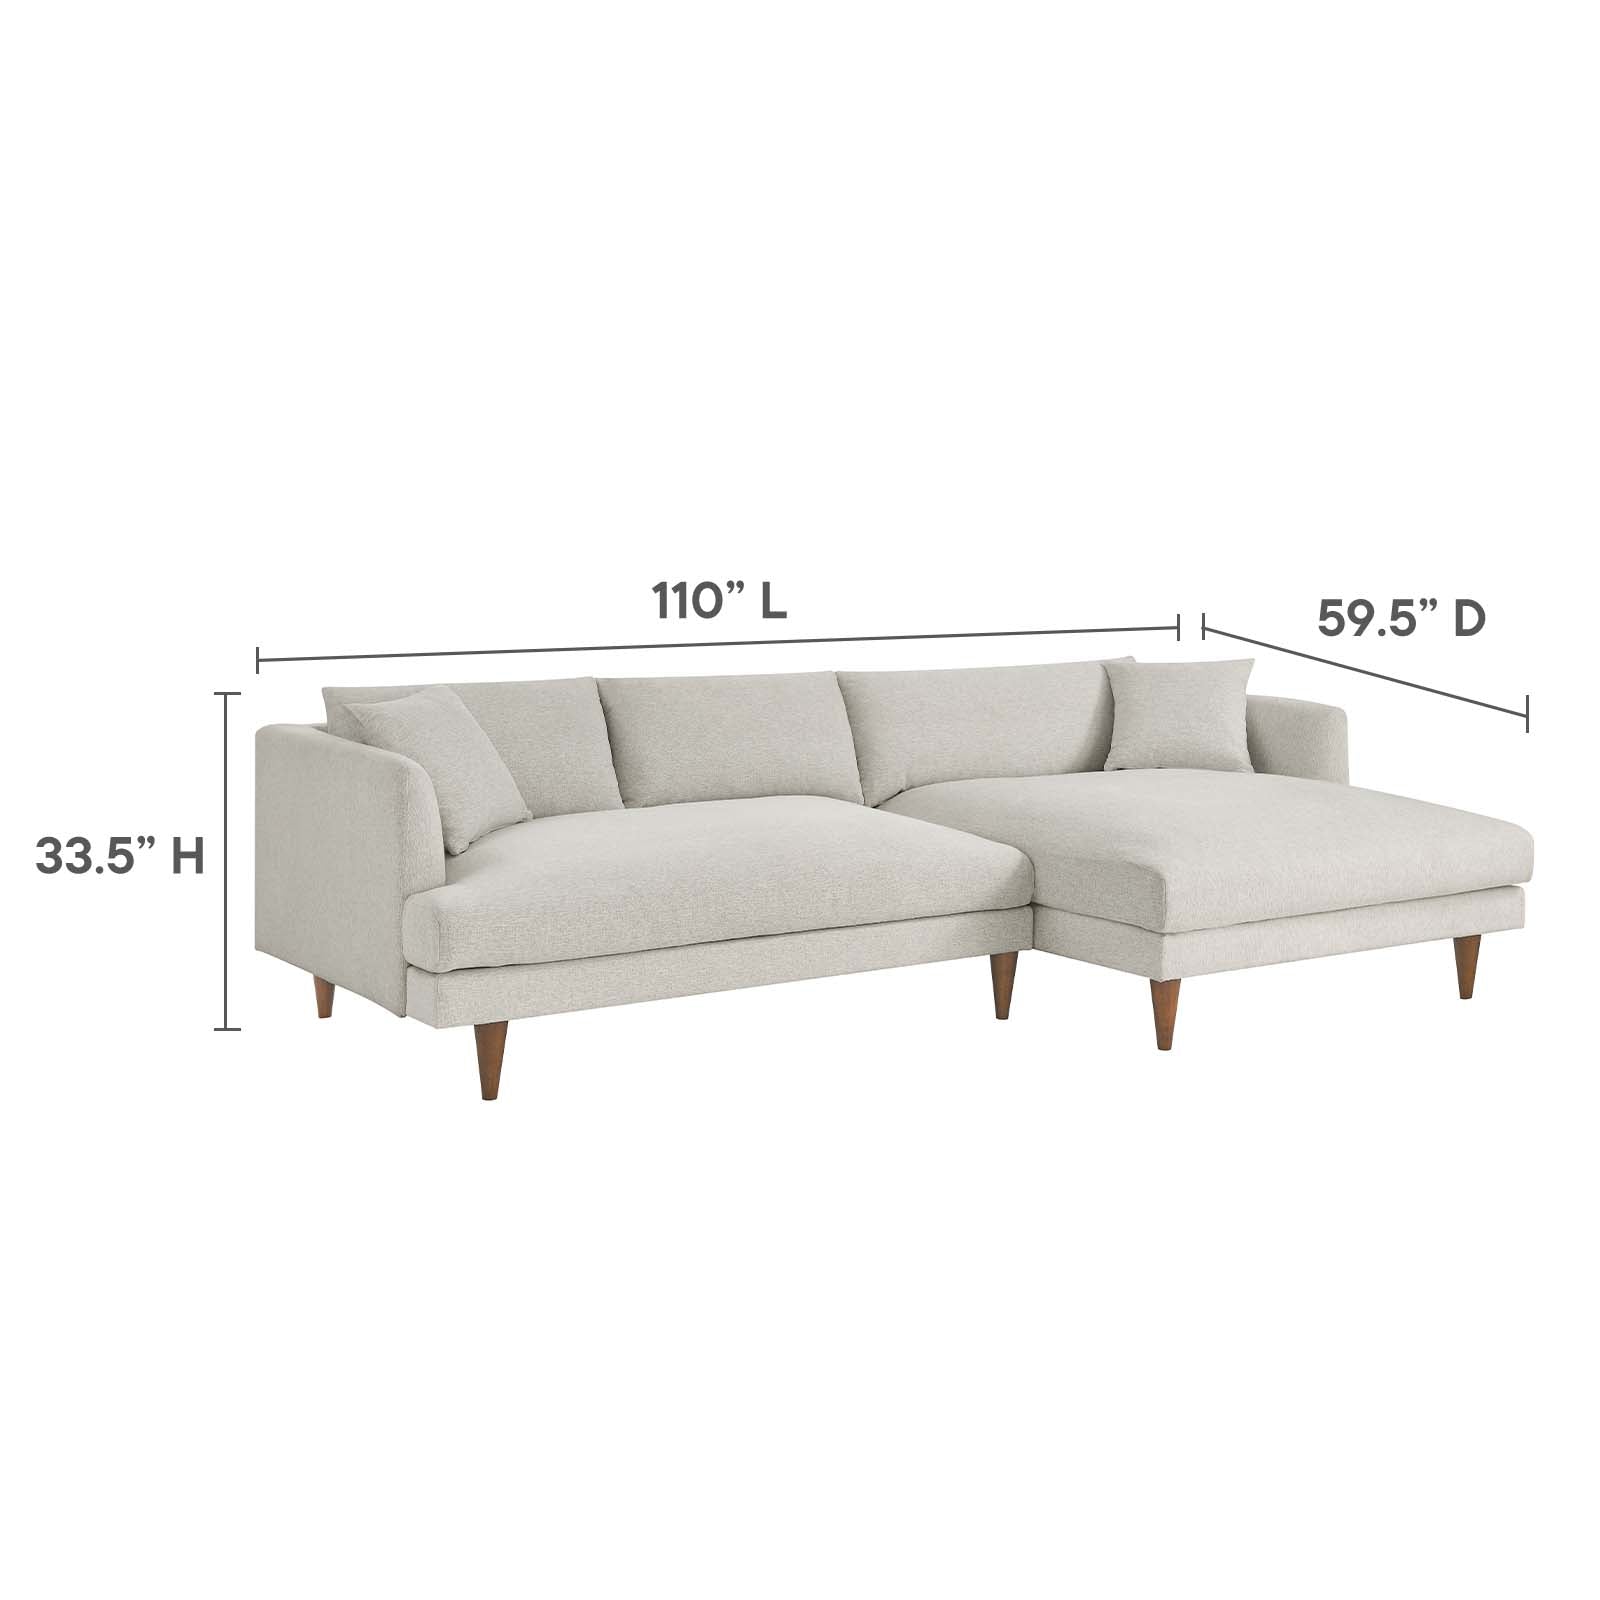 Zoya Right-Facing Down Filled Overstuffed Sectional Sofa